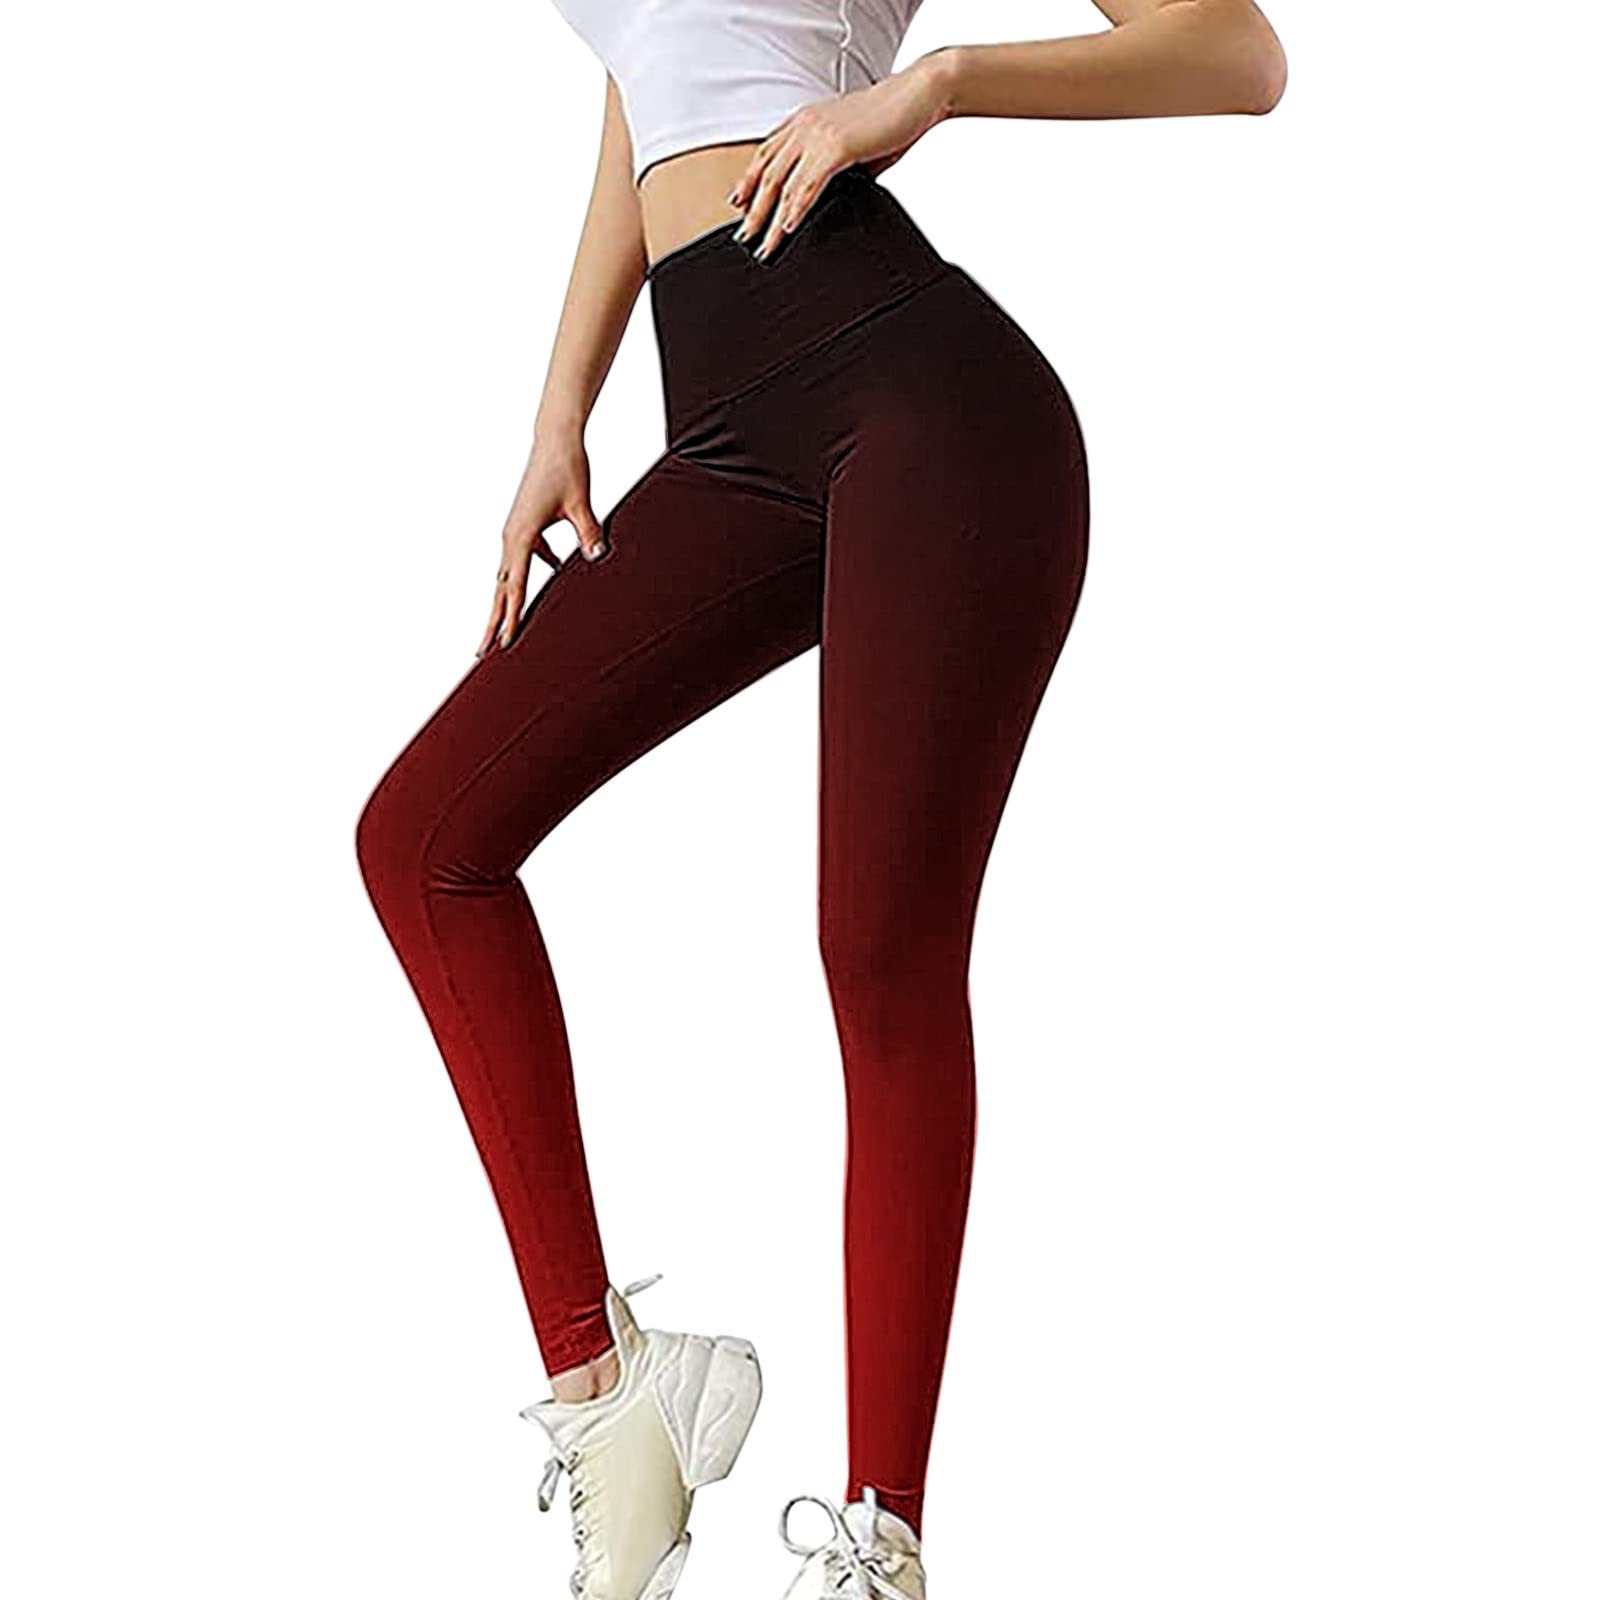 Women's Pocket Sexy Stretch Leggings Fitness Track Pants,High